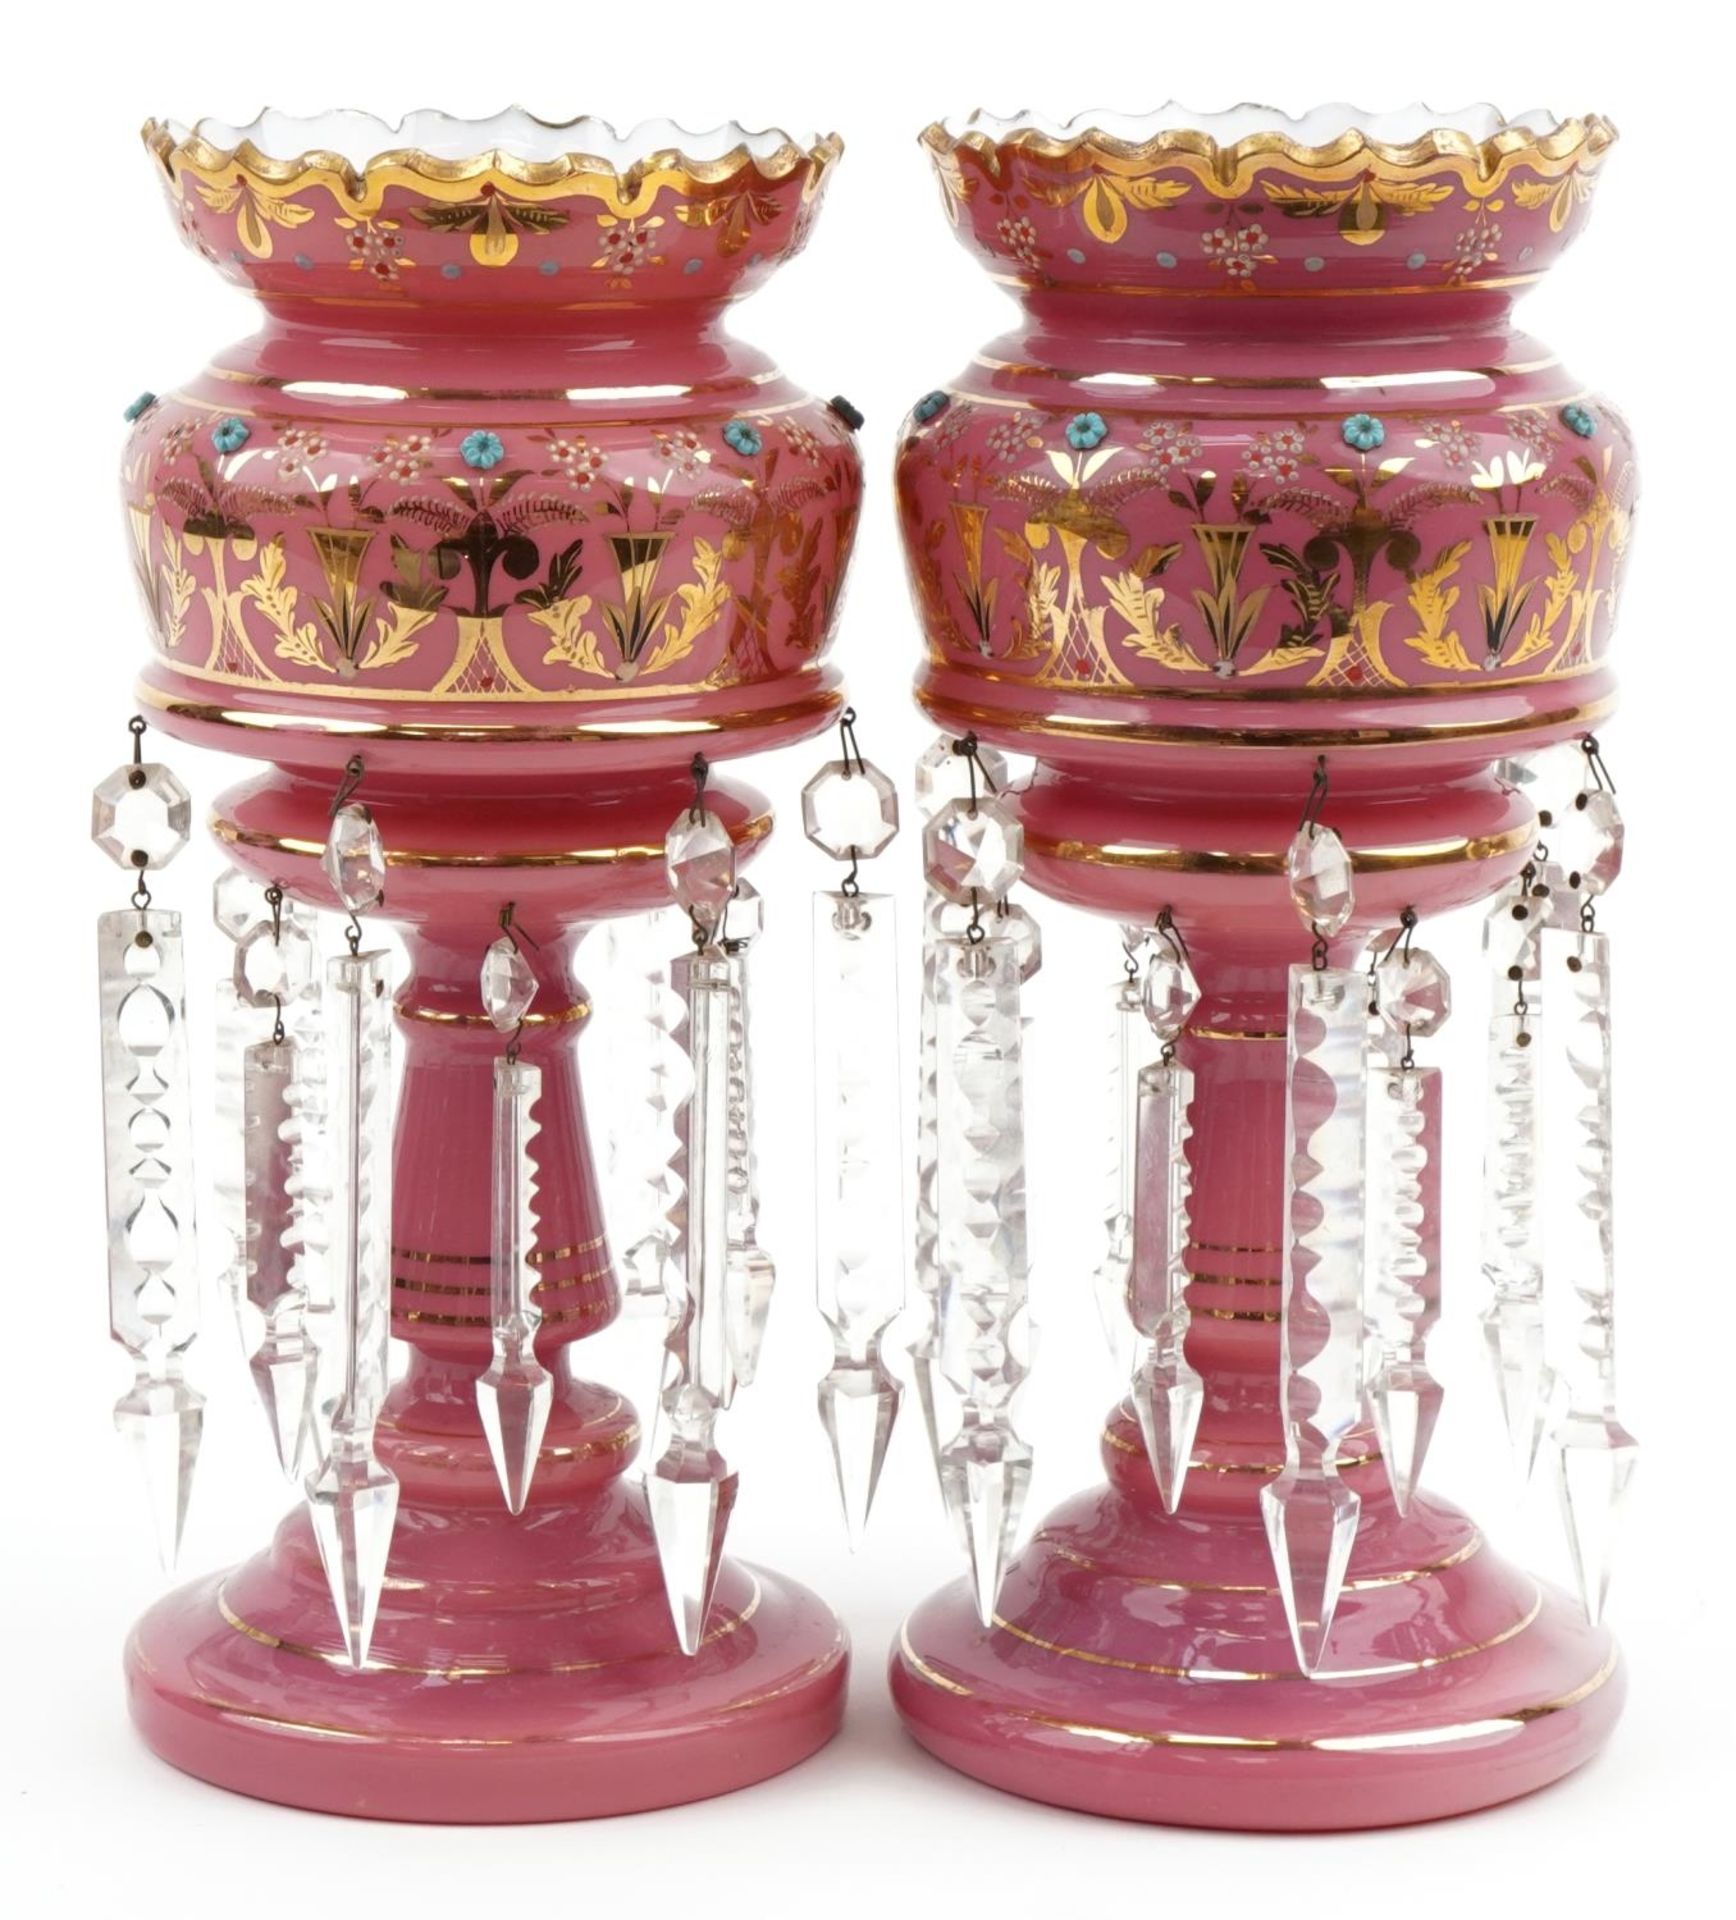 Pair of 19th century pink opaline glass lustres with drops enamelled and gilded with flowers, each - Image 2 of 4